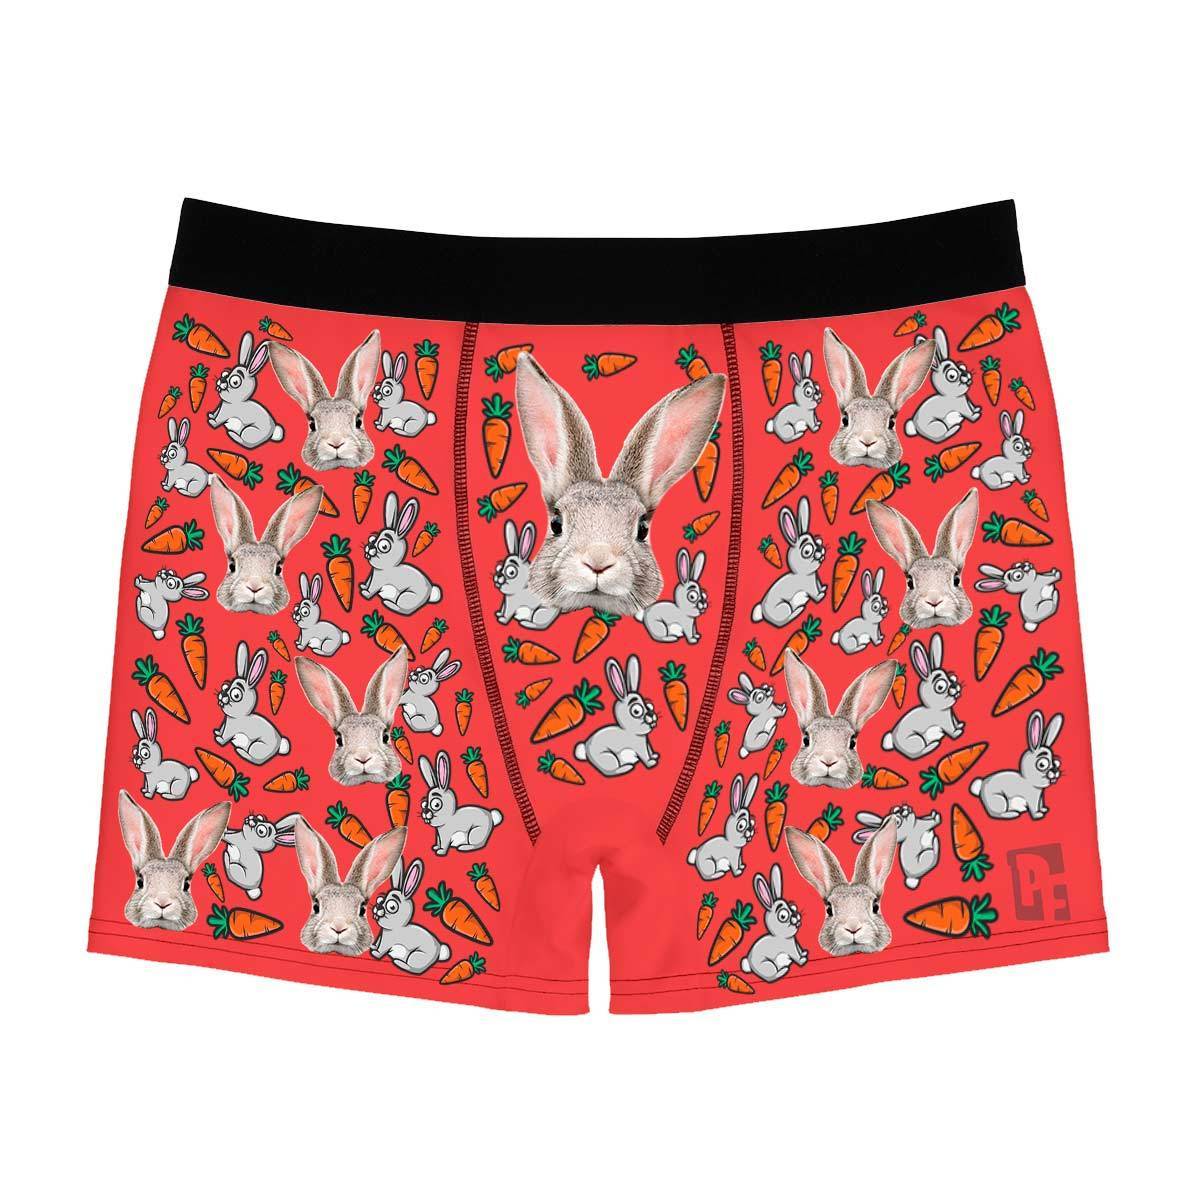 Red Bunny men's boxer briefs personalized with photo printed on them